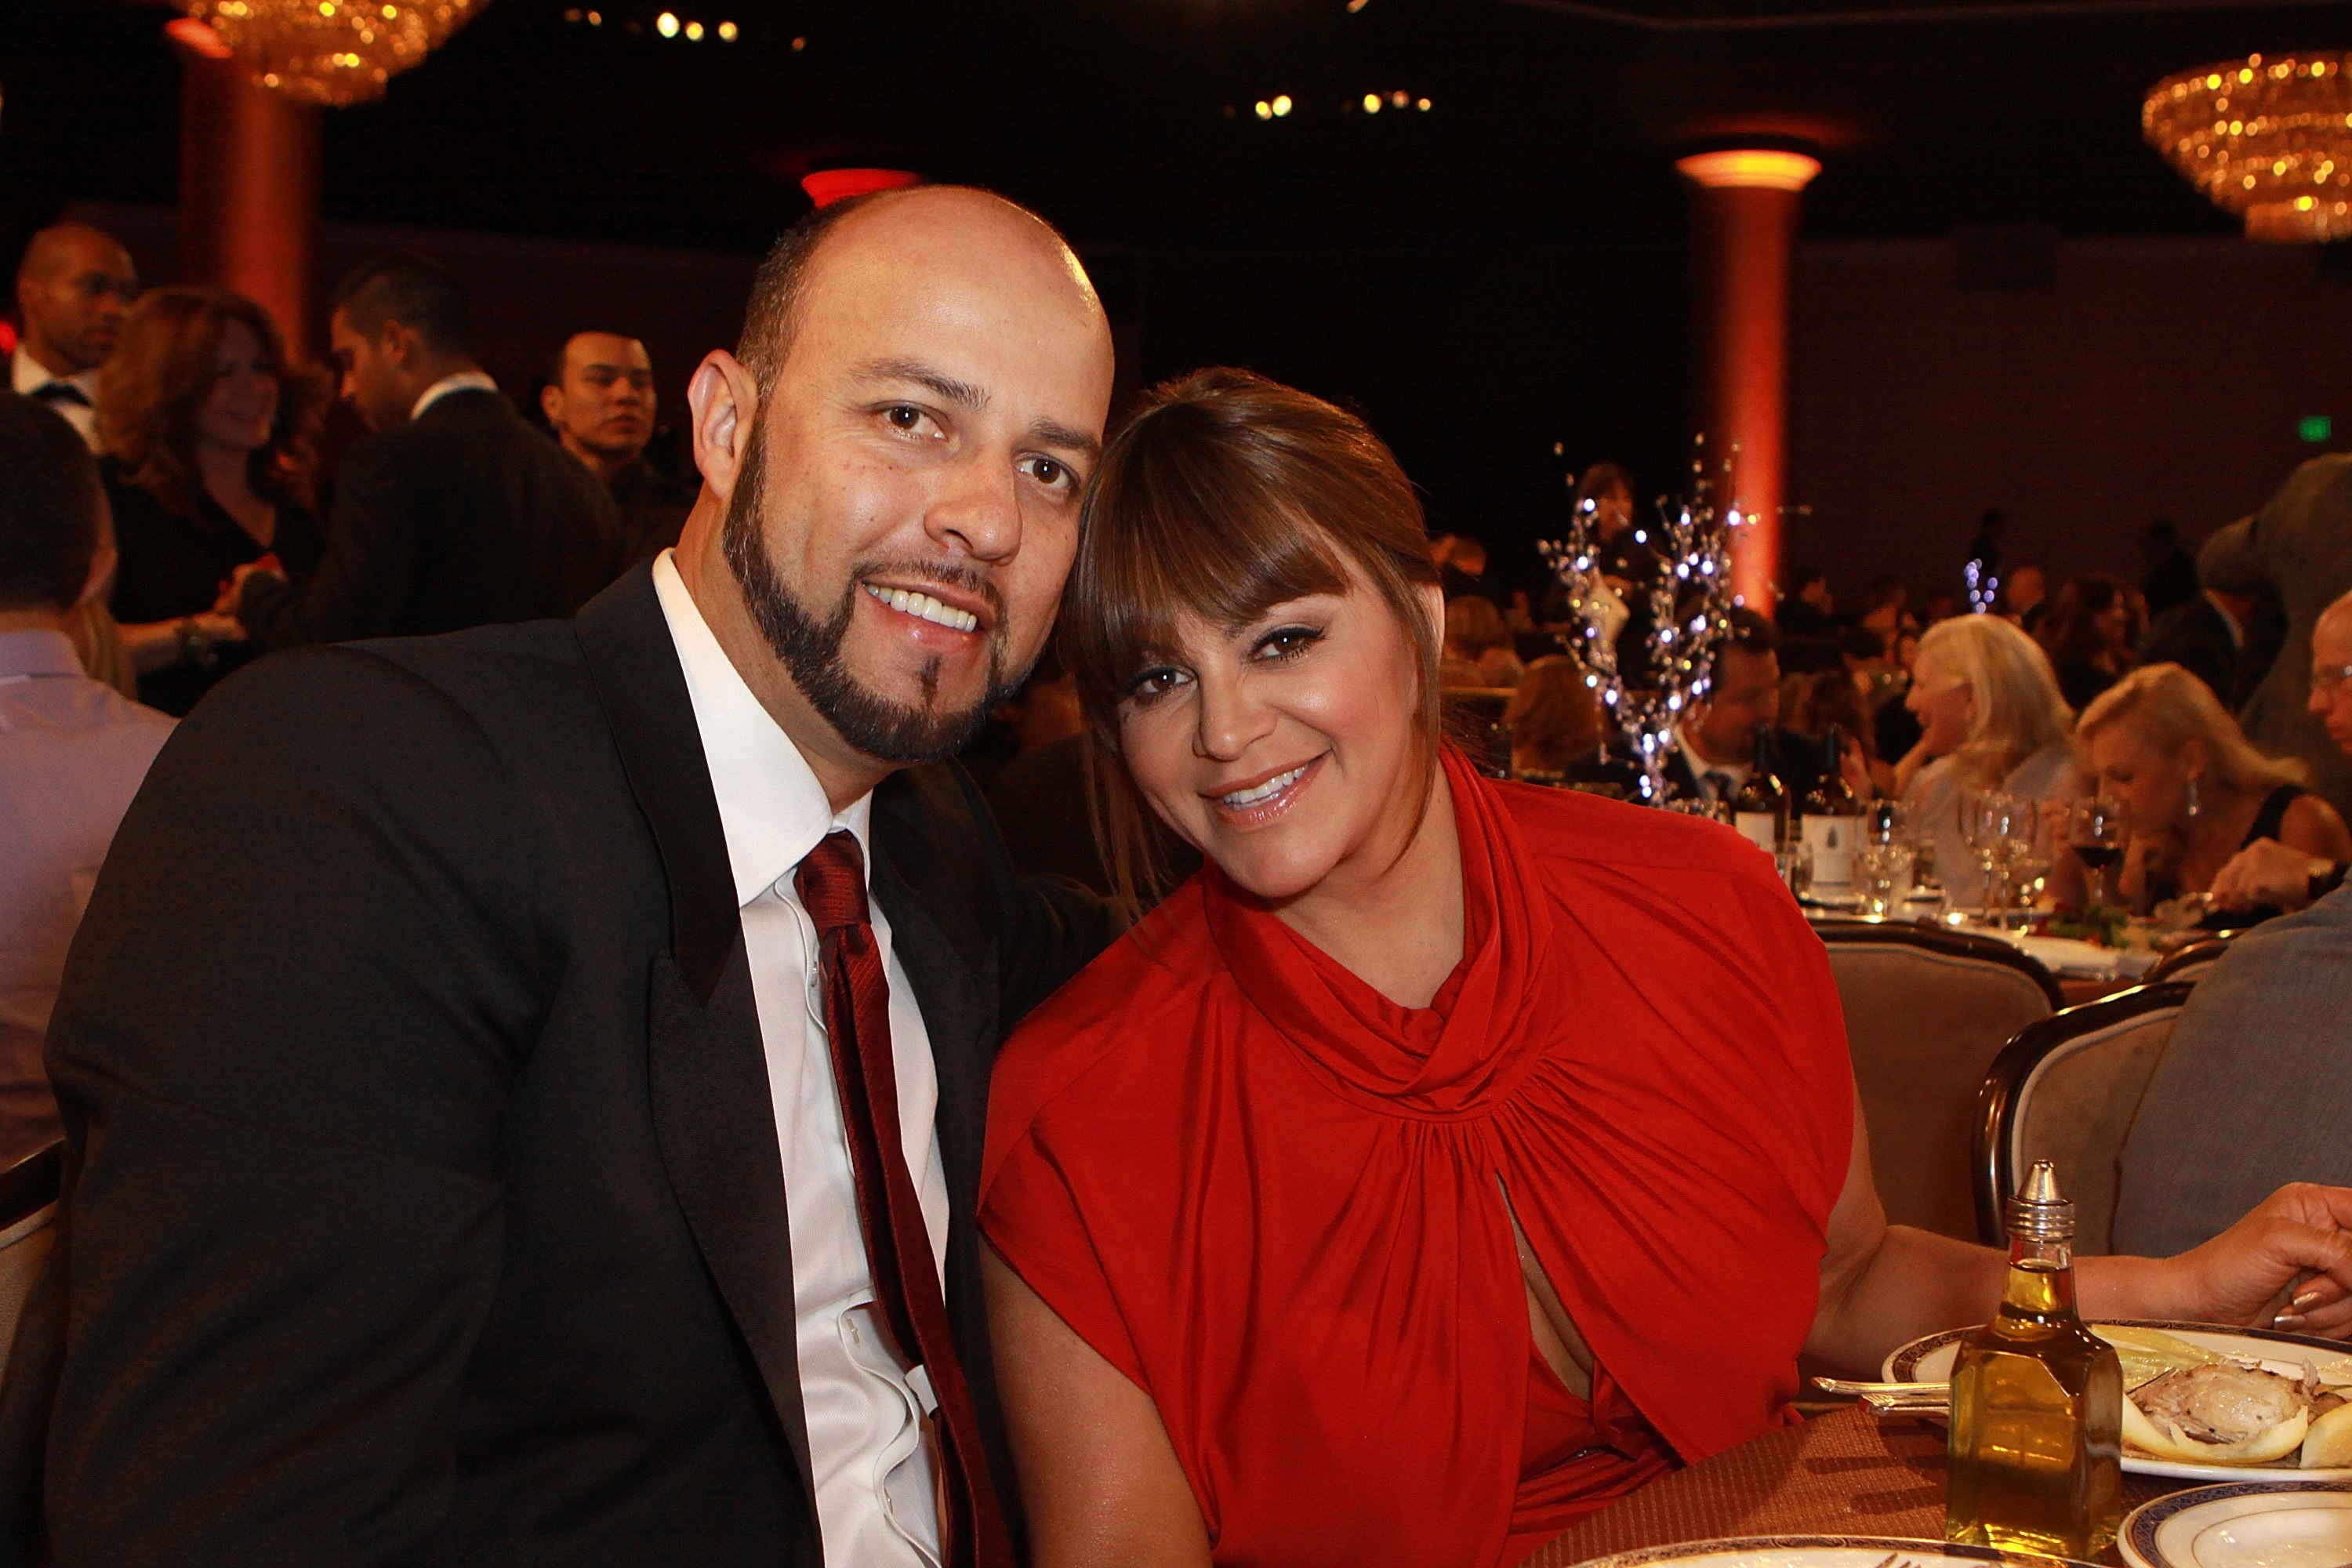 Esteban Loaiza and his late wife, Jenni Rivera, at the 27th Annual Imagen Awards hosted at The Beverly Hilton Hotel in Beverly Hills, California, on August 10, 2012. | Source: Getty Images